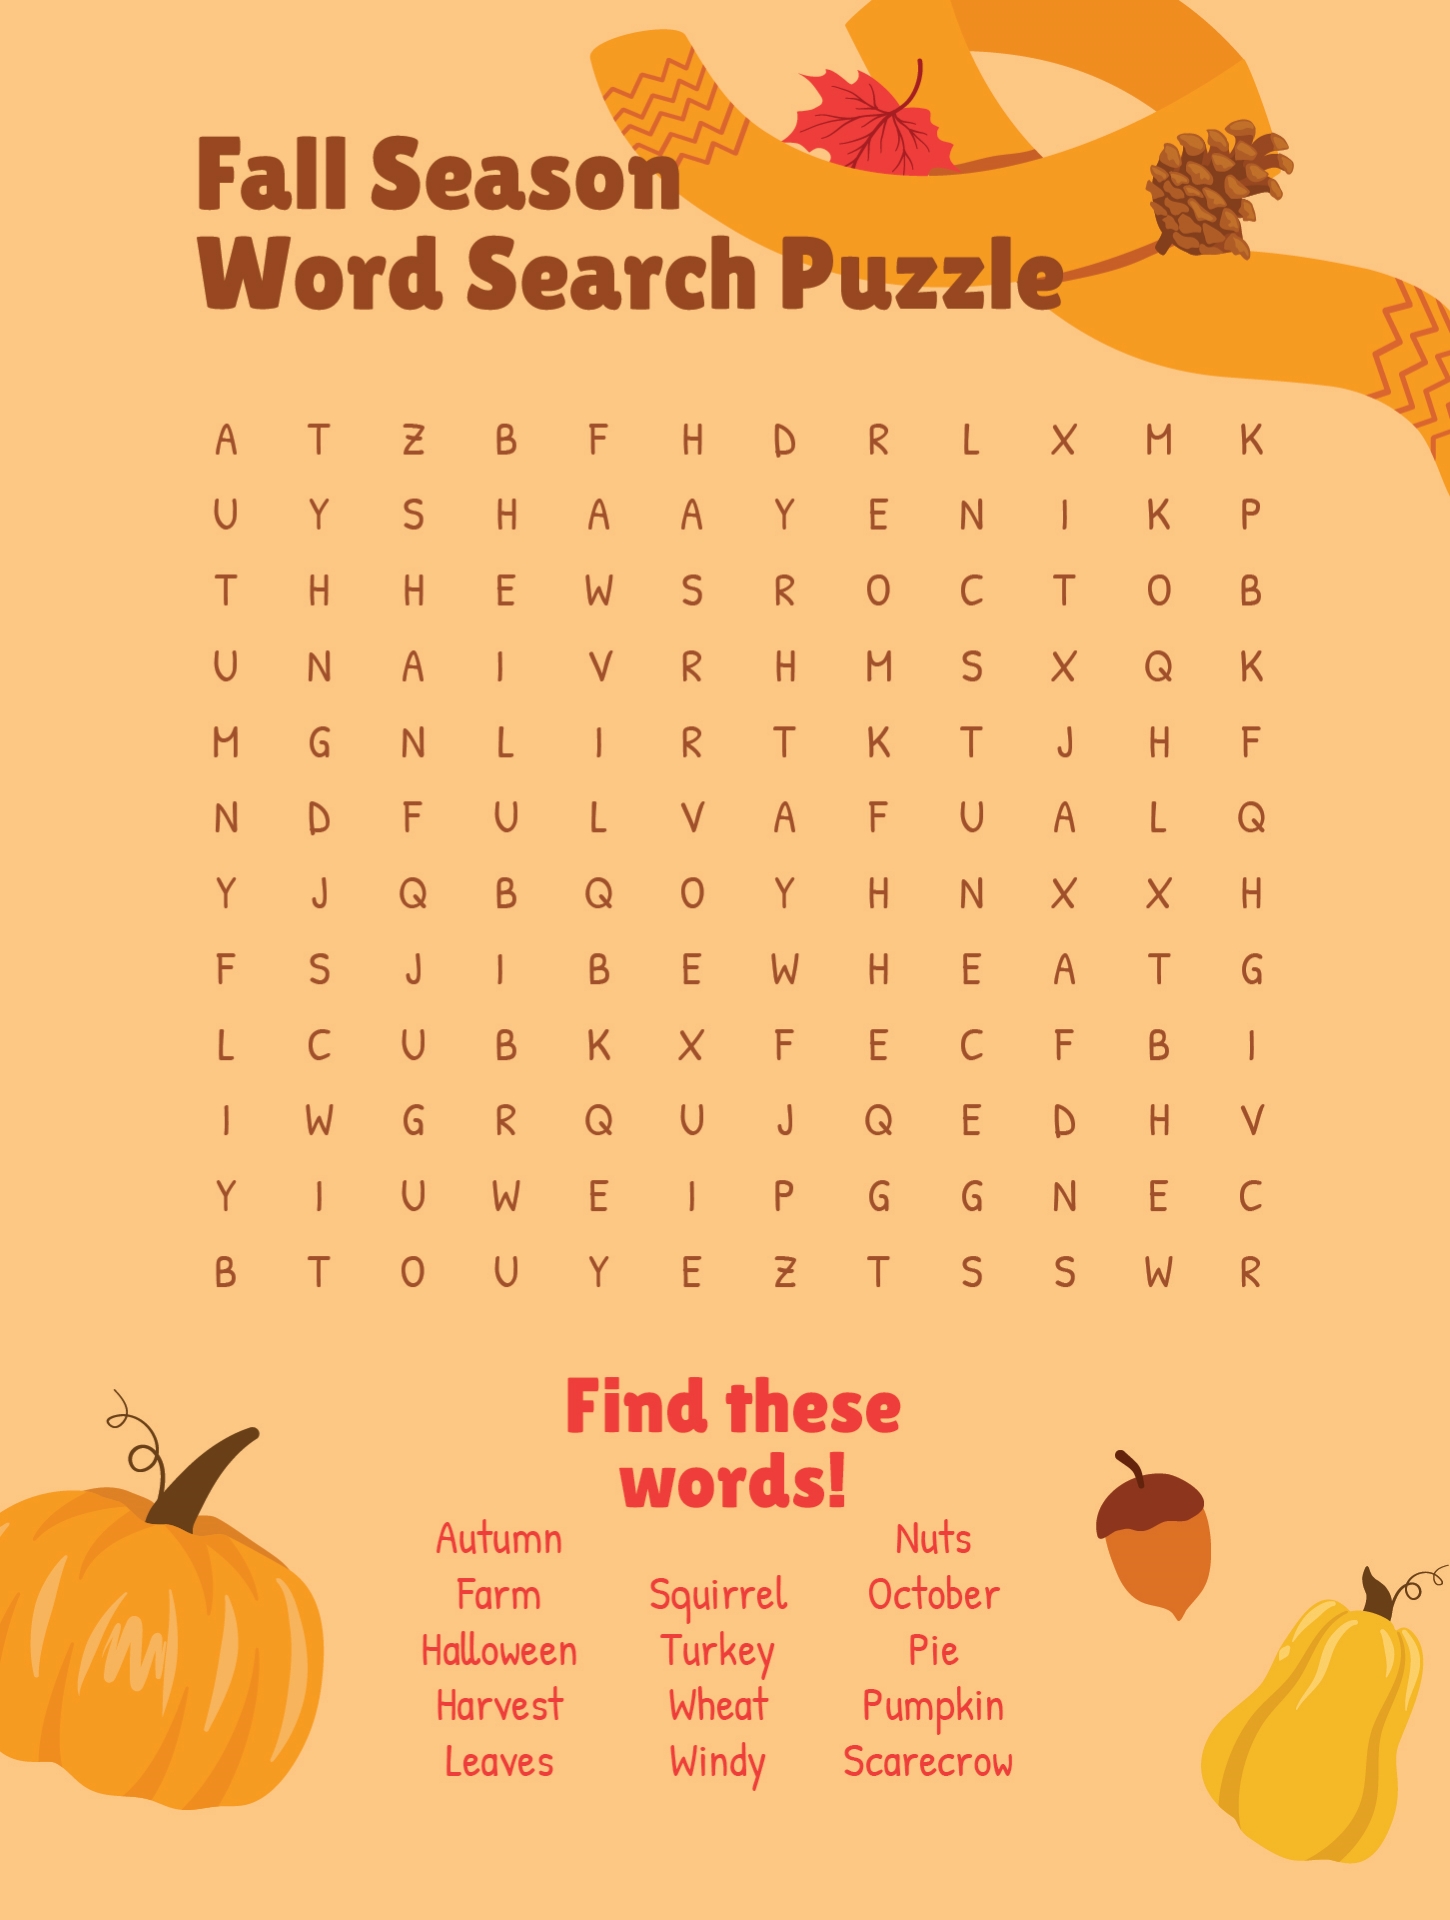 5-best-images-of-fall-word-search-printable-fall-word-search-puzzles